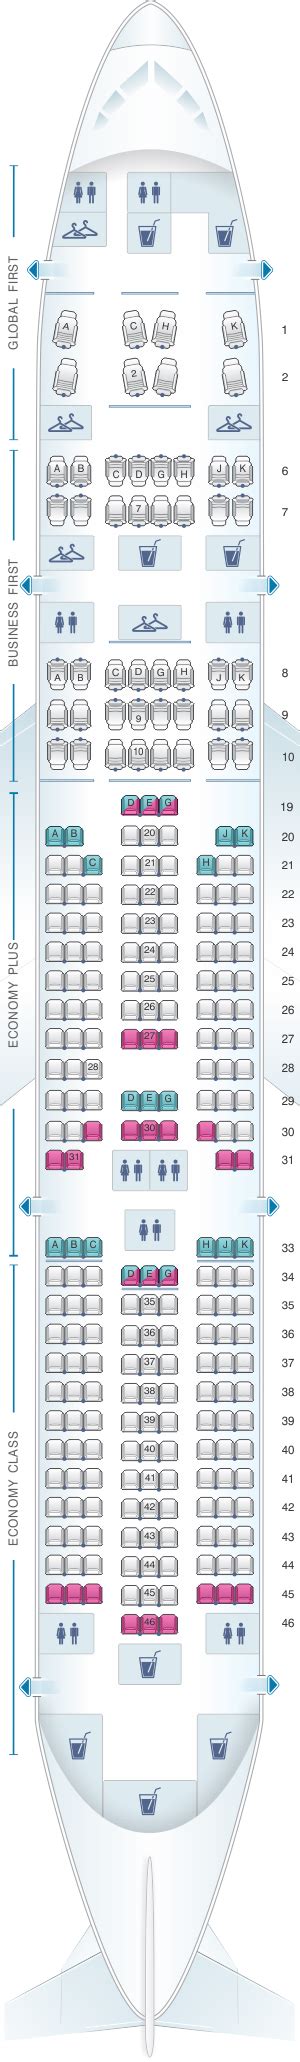 Boeing 777 200 United Seating. United Boeing 737-900 Seat Map. United 777 300er Seat Map. Boeing 737 800 Seat Map United. United 757 300 Seat Map. ... Depending on the aircraft, passengers can access a United Airlines seat map for First, Business, Premium Economy, and Economy classes. They choose where to sit to guarantee the most …. 